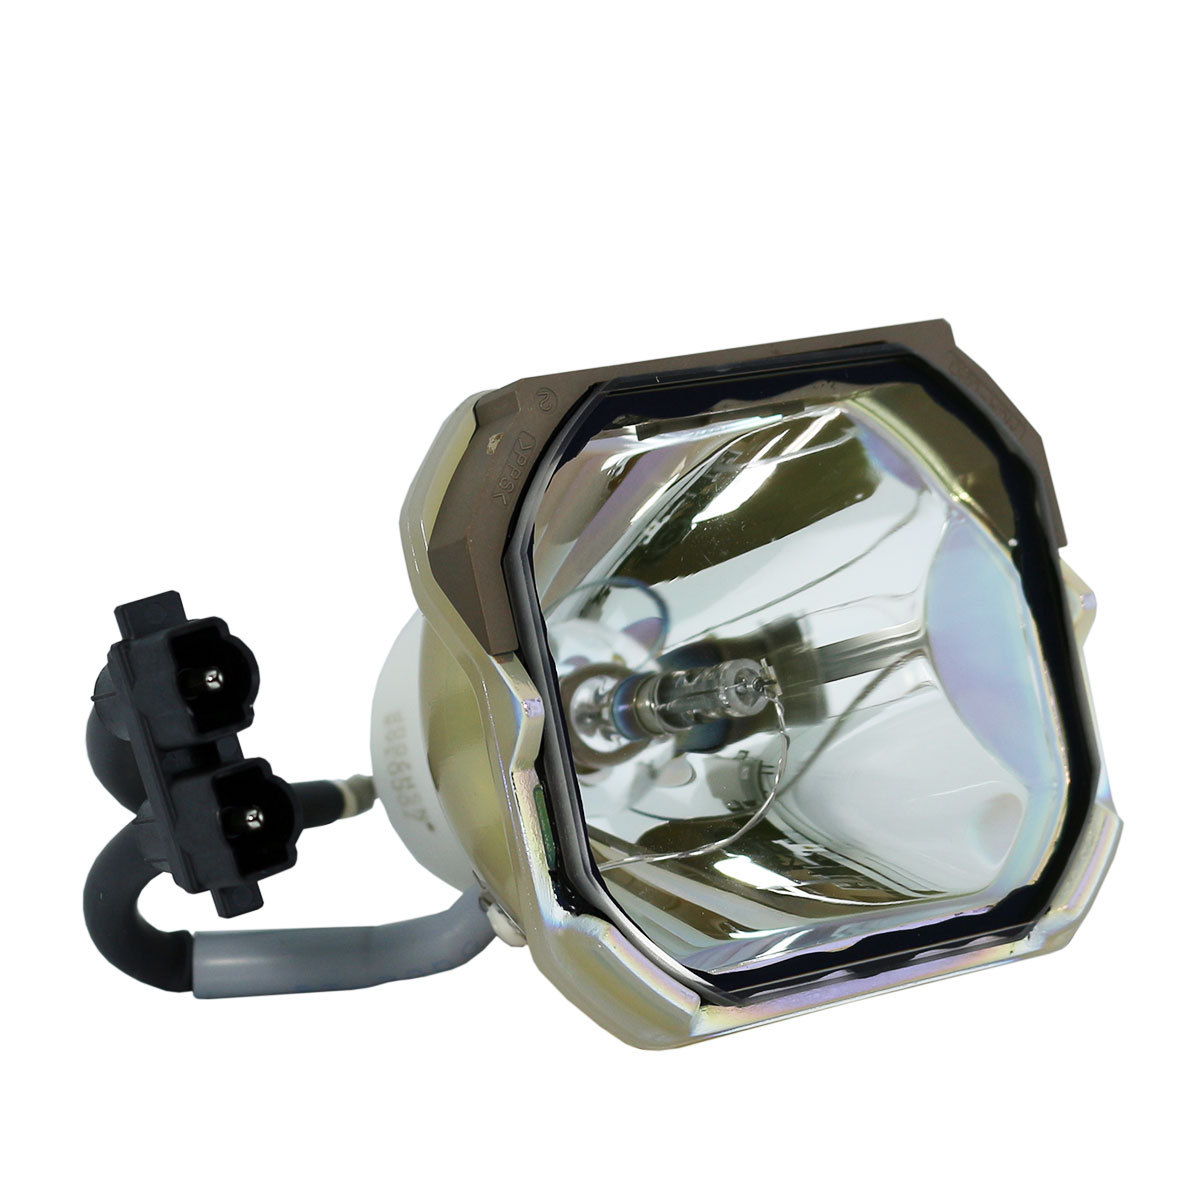 Primary image for Hitachi DT00431 Ushio Projector Bare Lamp